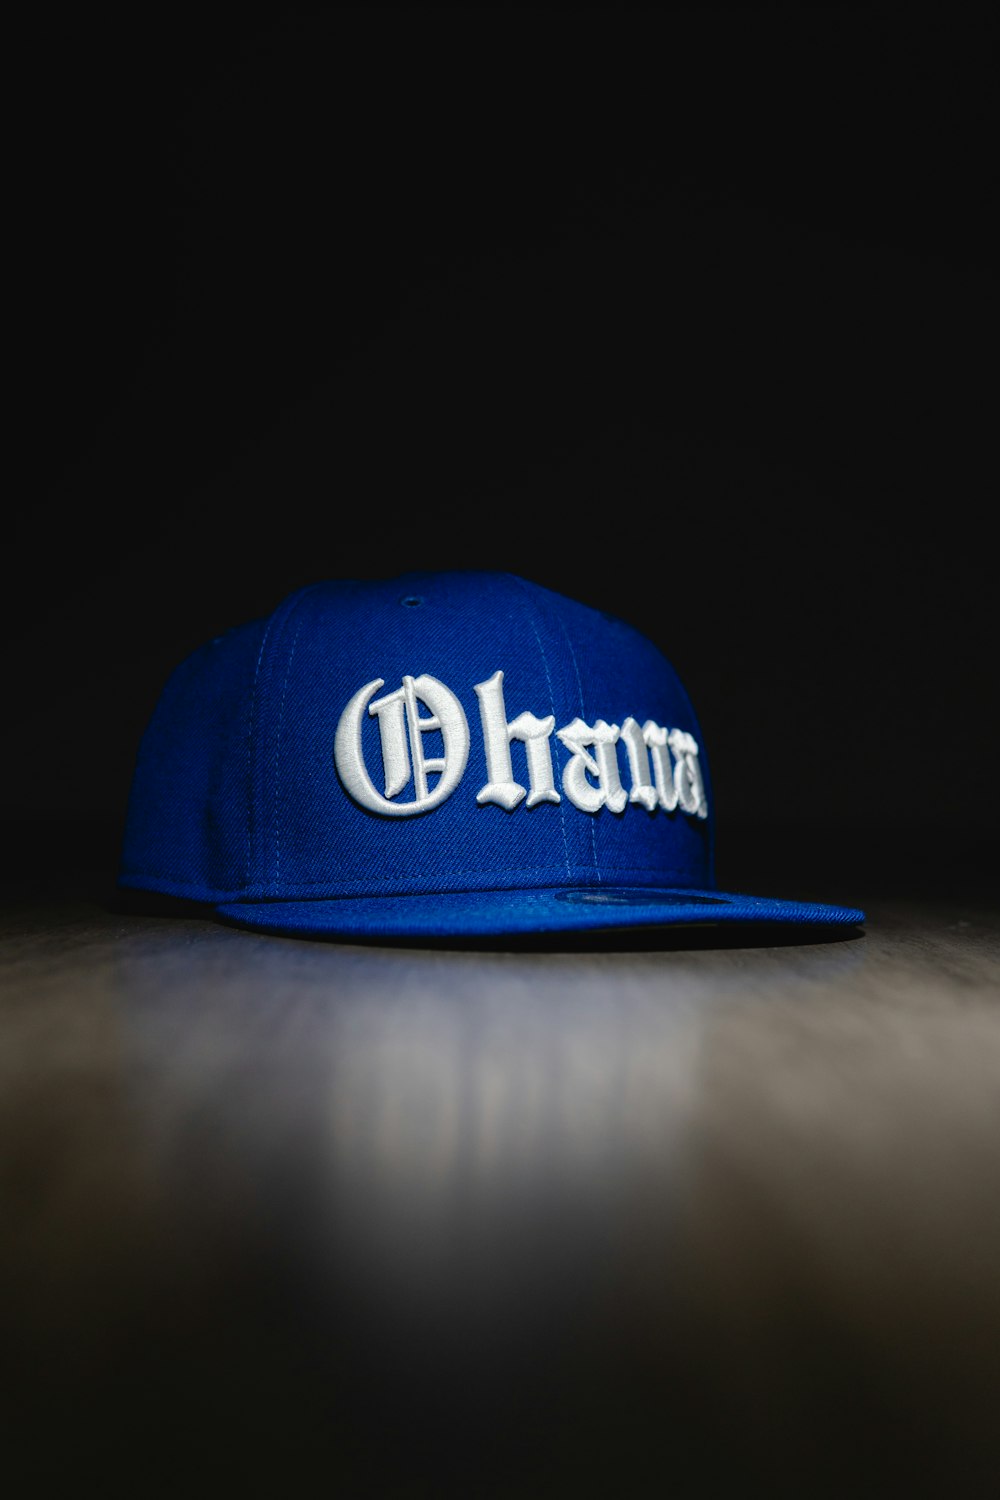 a blue hat with the word champion on it